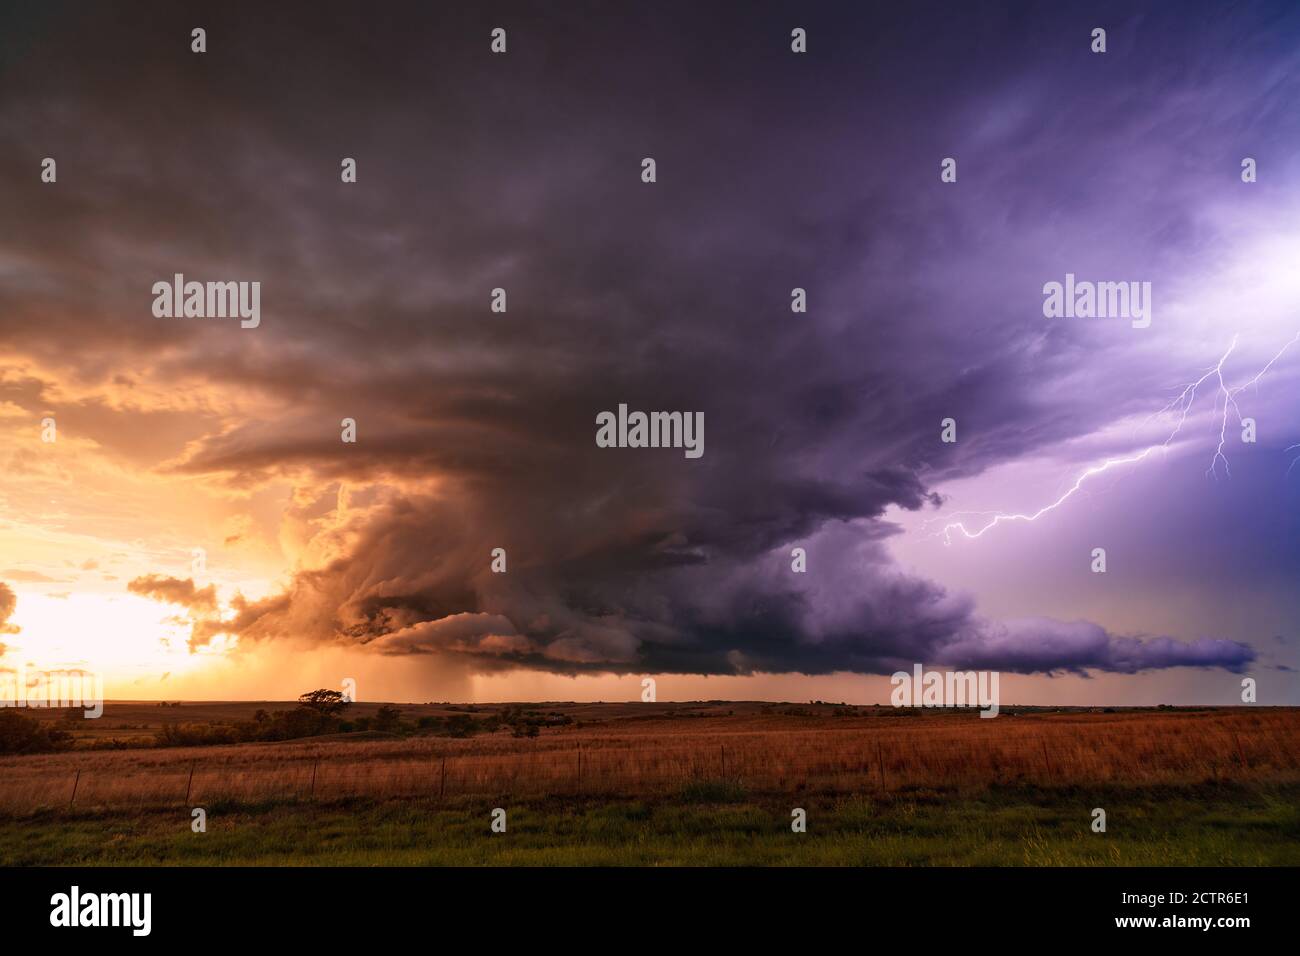 Scenic landscape with supercell thunderstorm clouds and lightning in a sunset sky near Strong City, Oklahoma Stock Photo